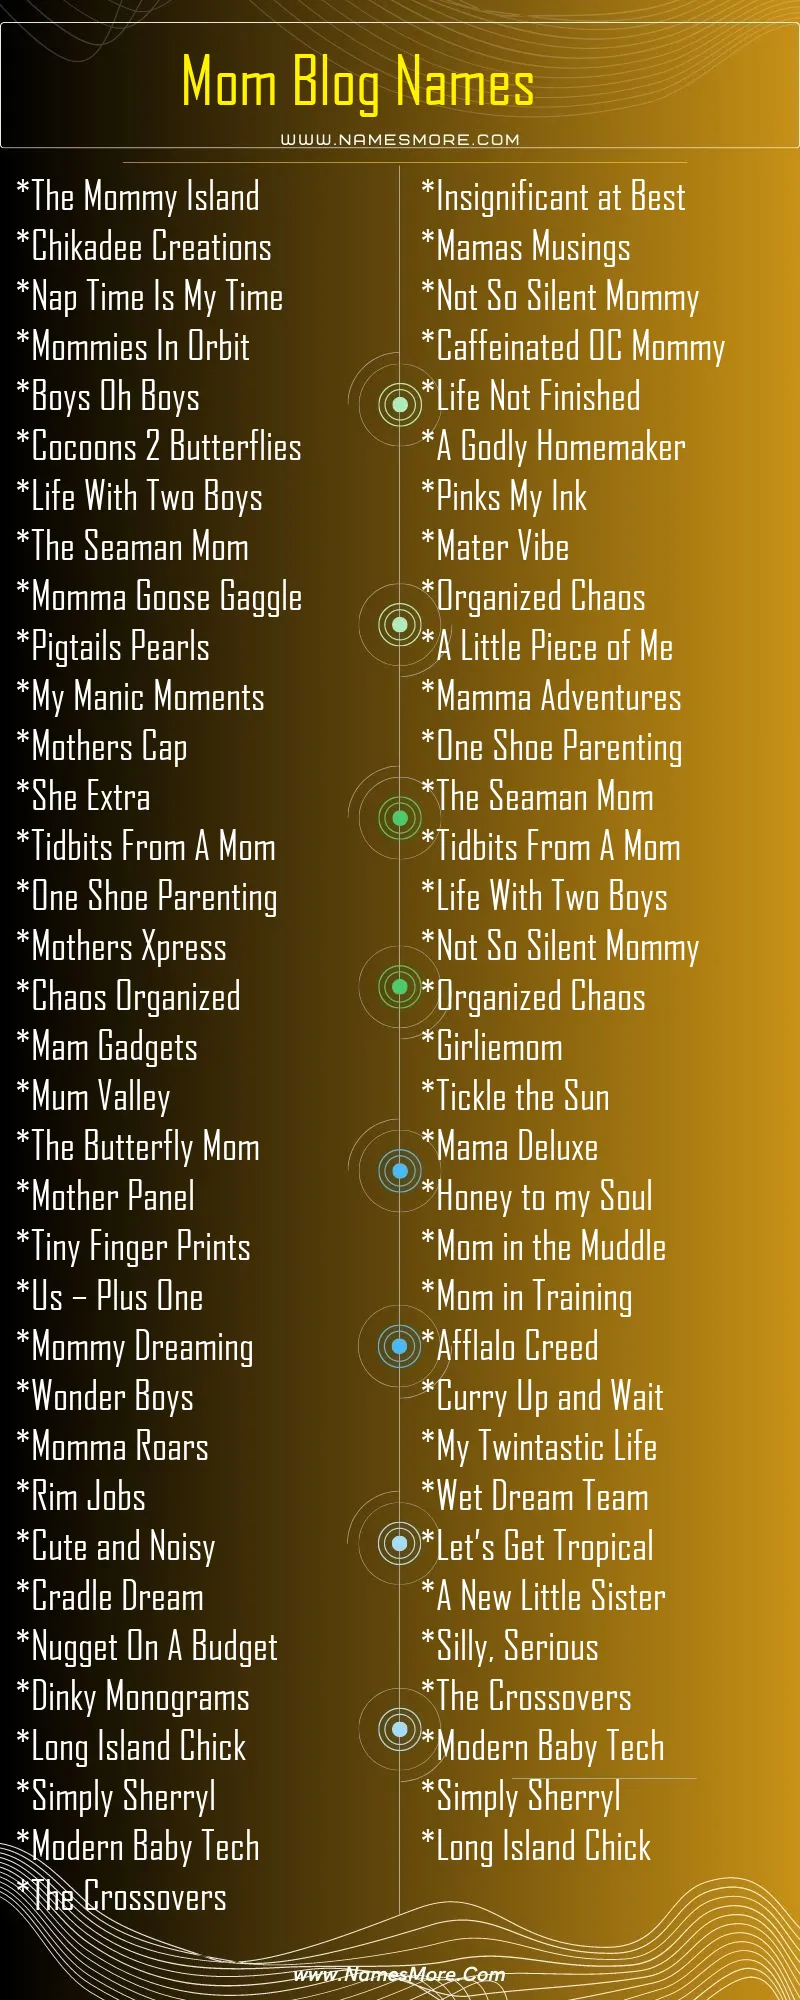 Mom Blog Names and Pages names List Infographic